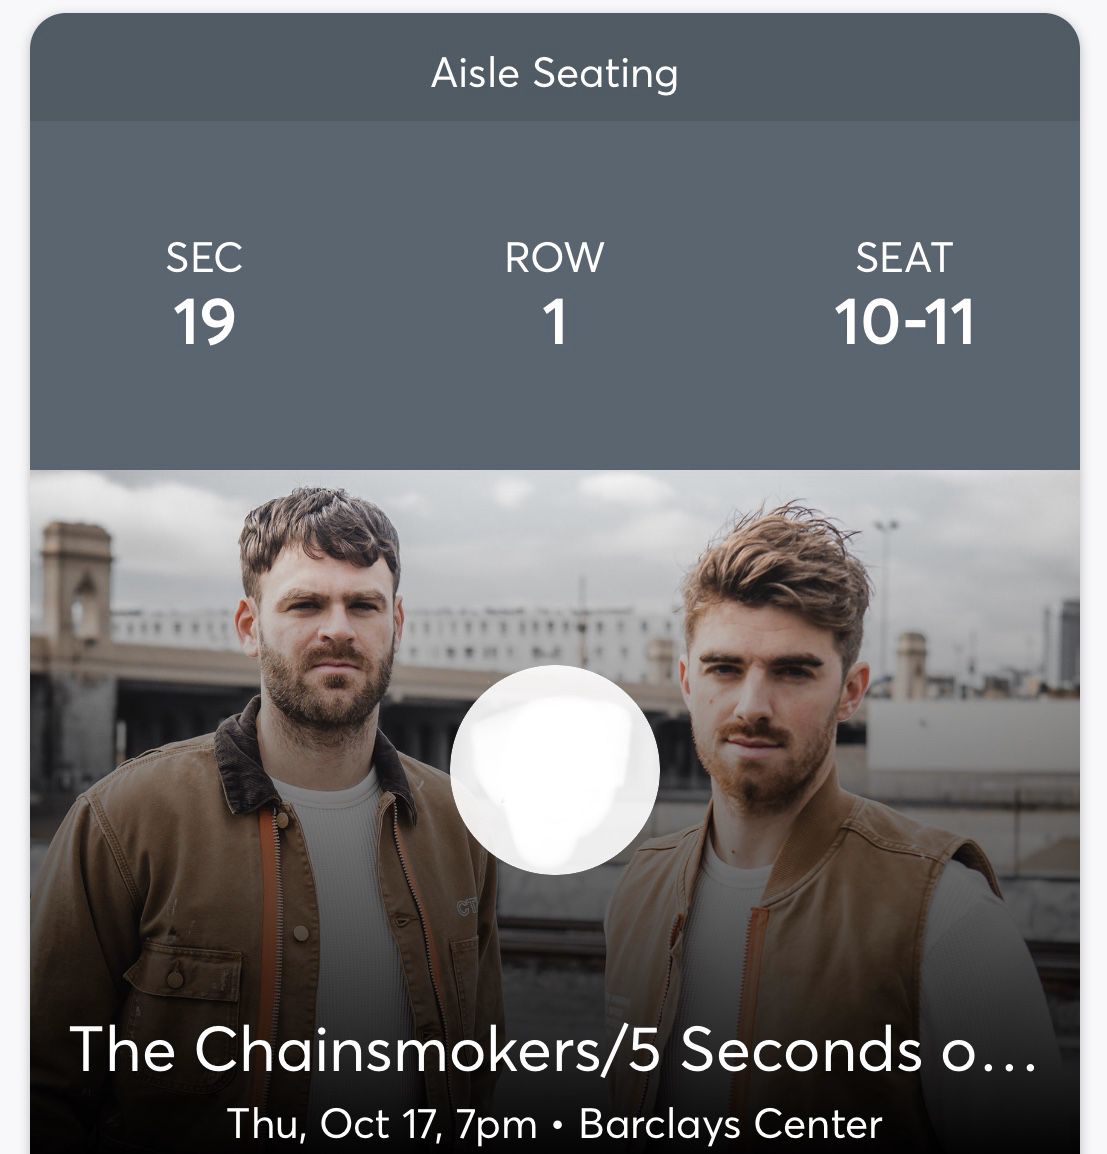 2 Tickets Aisle + Front Row!! The Chainsmokers/5 Seconds of Summer